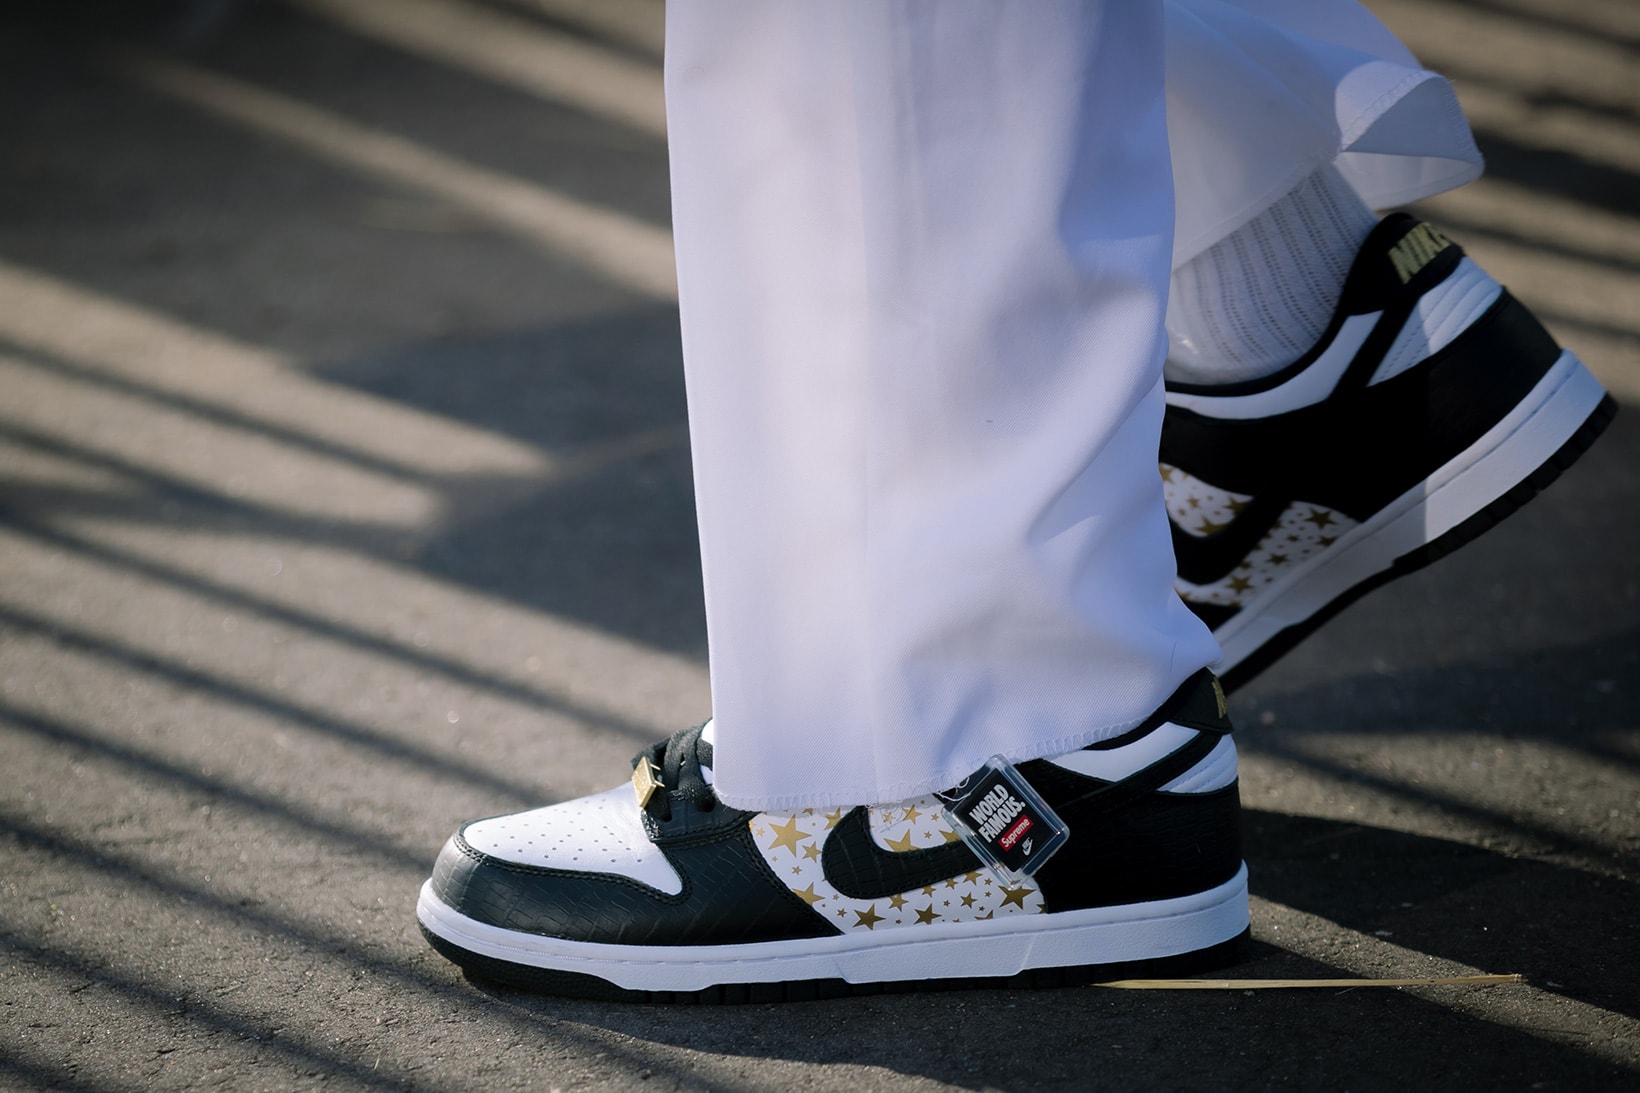 Supreme Nike Stars Sneakers SB Dunk Low Black White New York Fashion Week SS22 Best Street Style Trends Spring Summer 2022 Influencer